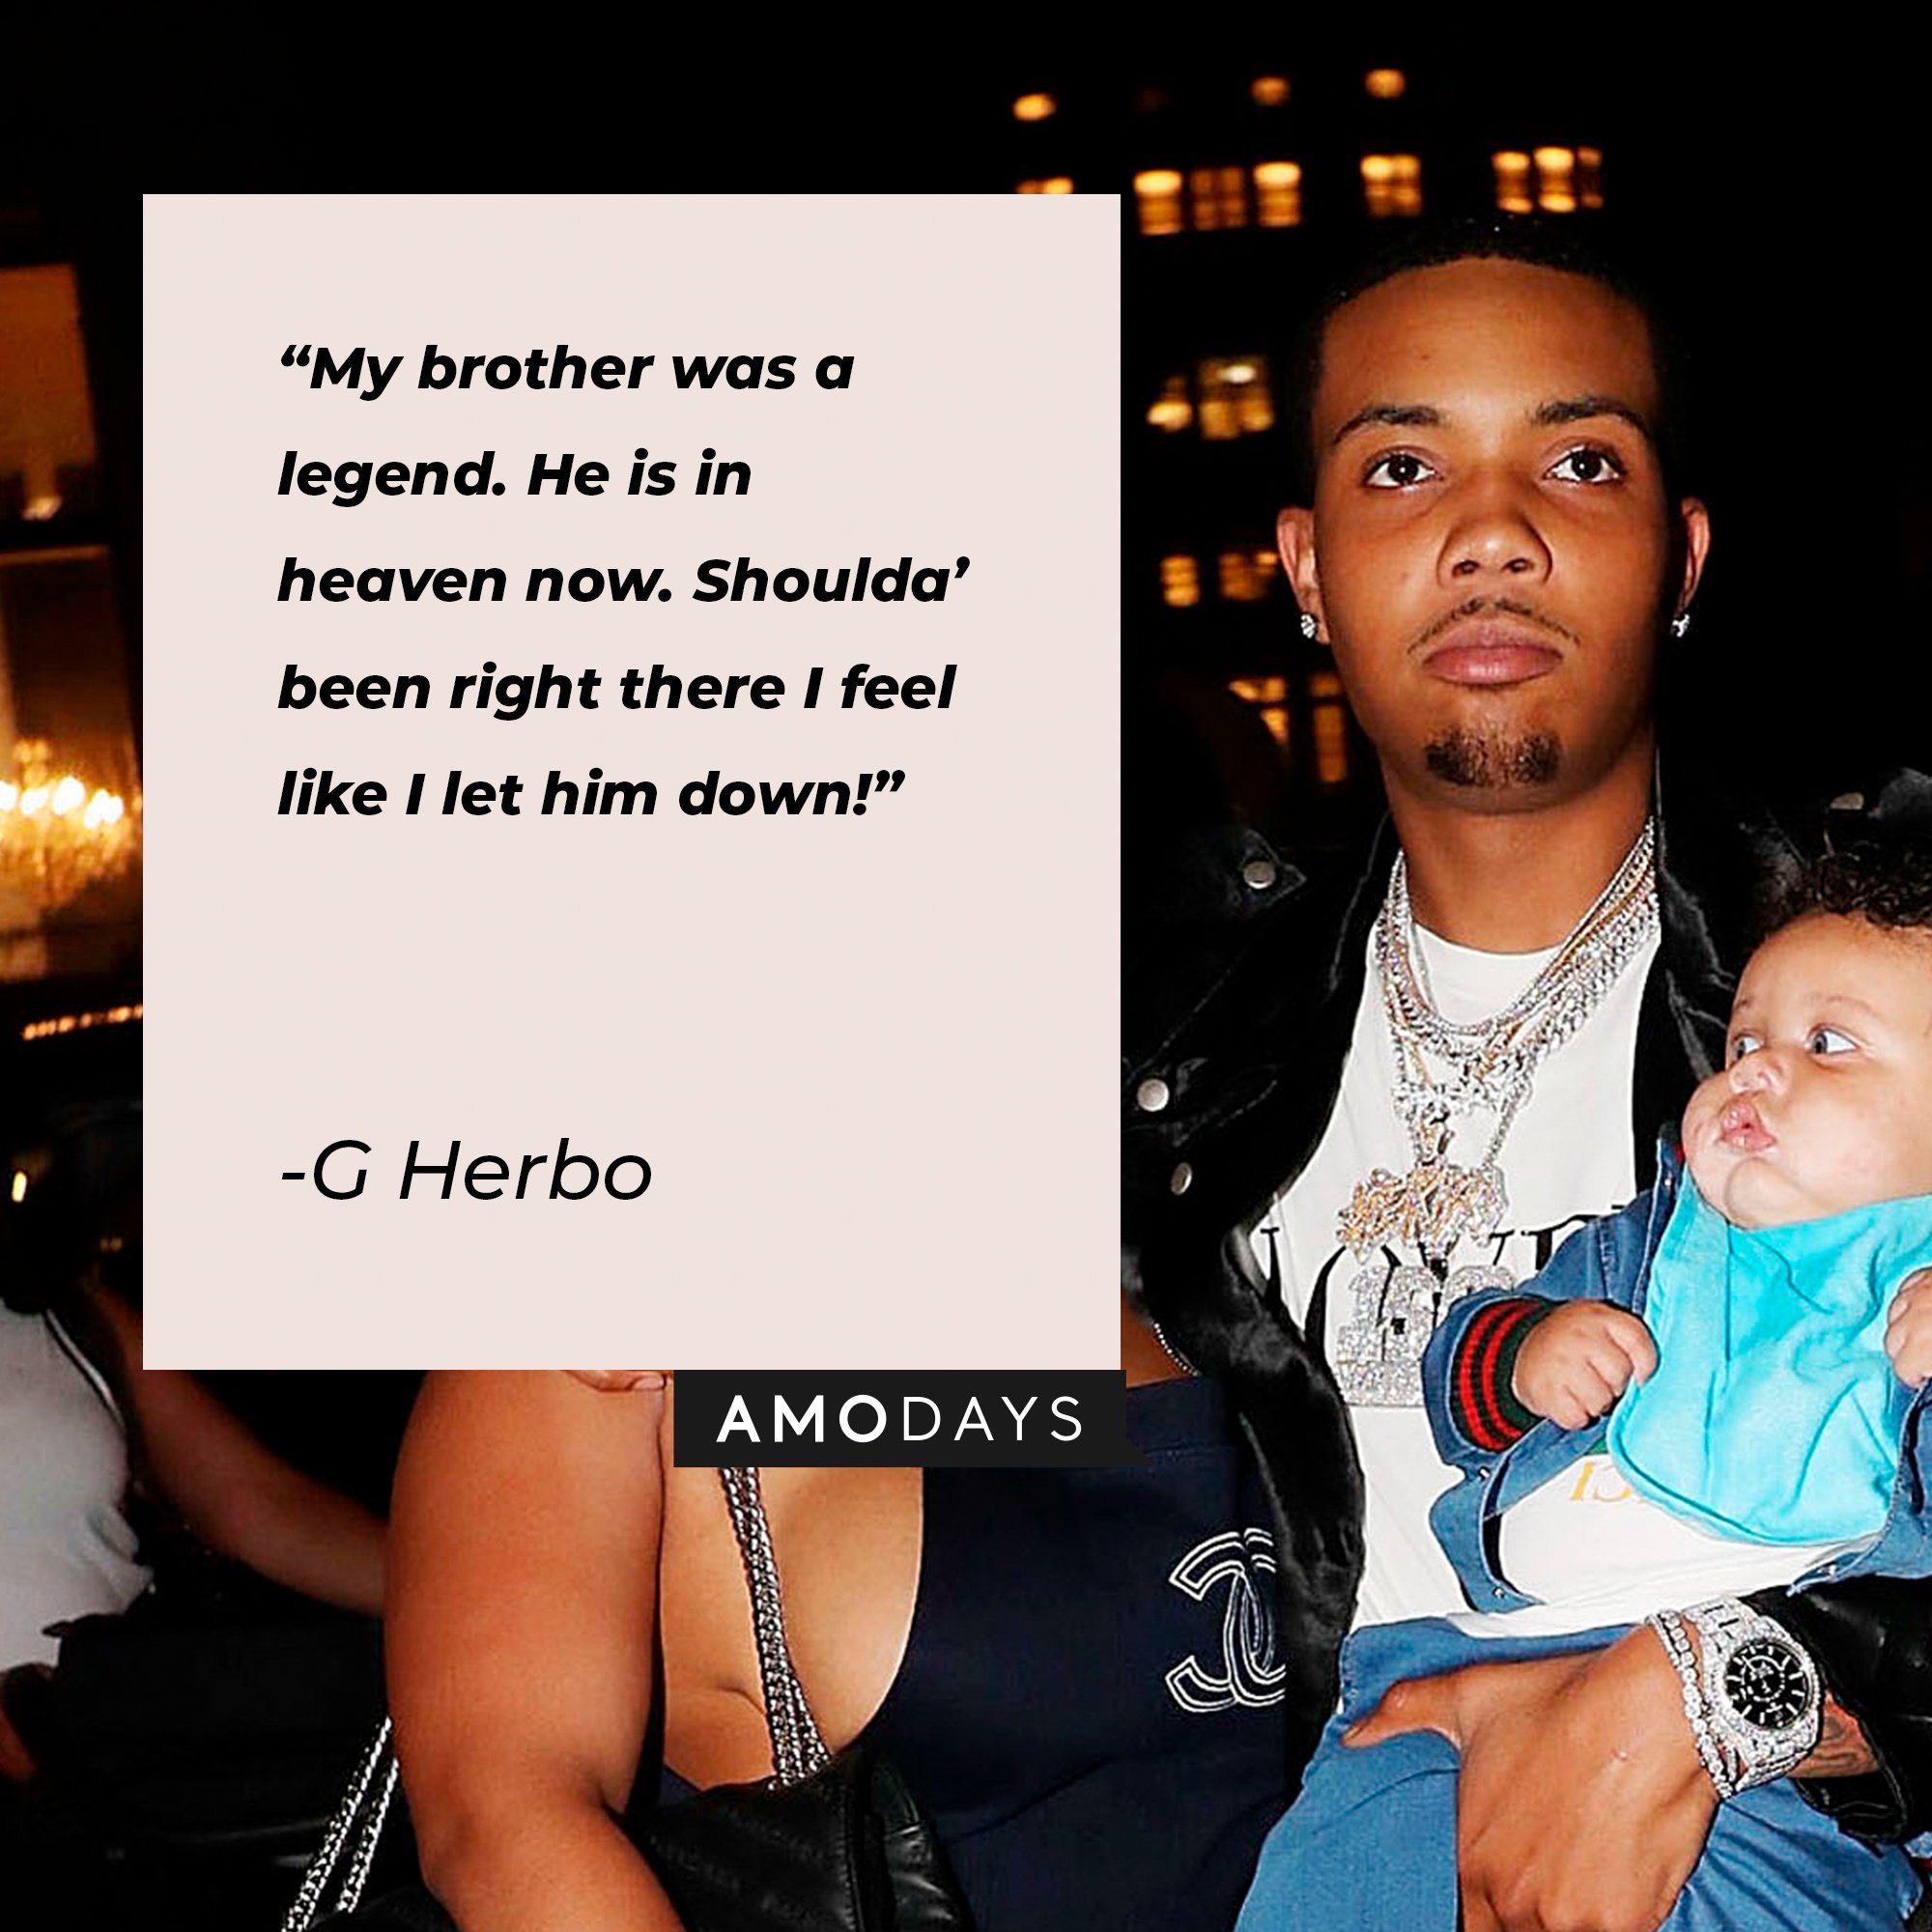 G Herbo’s quote: "My brother was a legend. He is in heaven now. Shoulda’ been right there I feel like I let him down!" | Image: AmoDays  